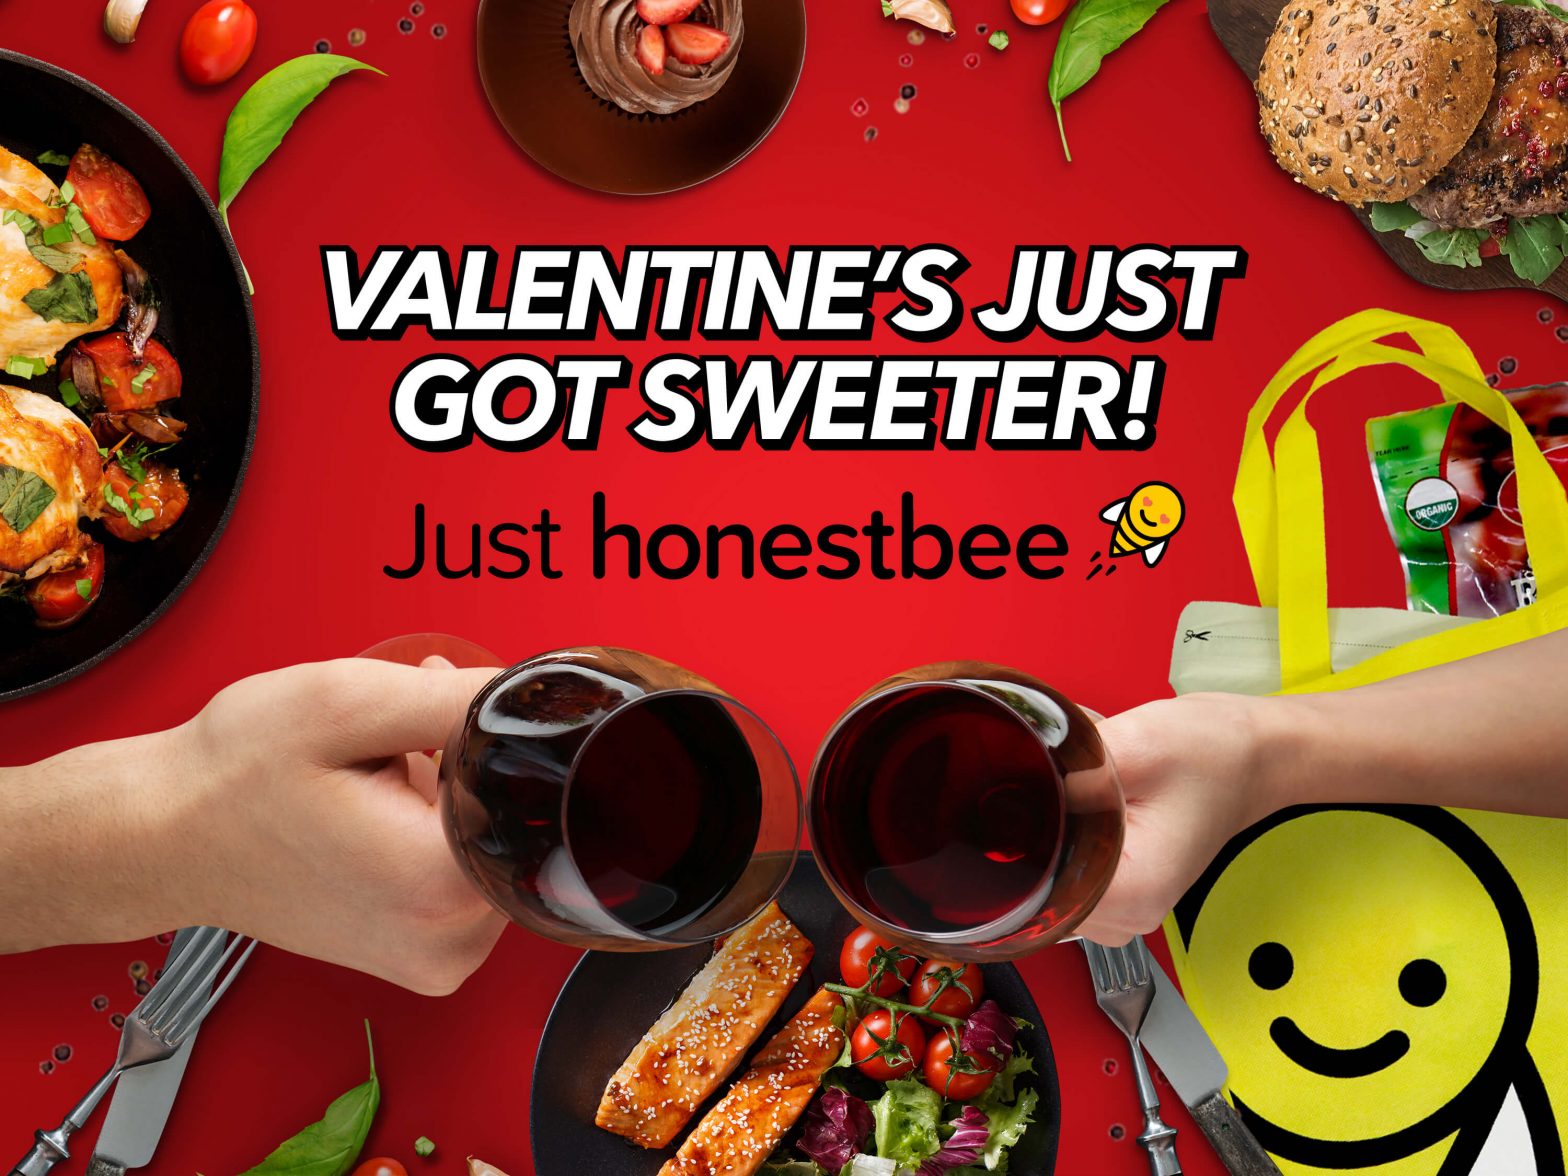 Celebrate Valentine’s Day comfortably with honestbee